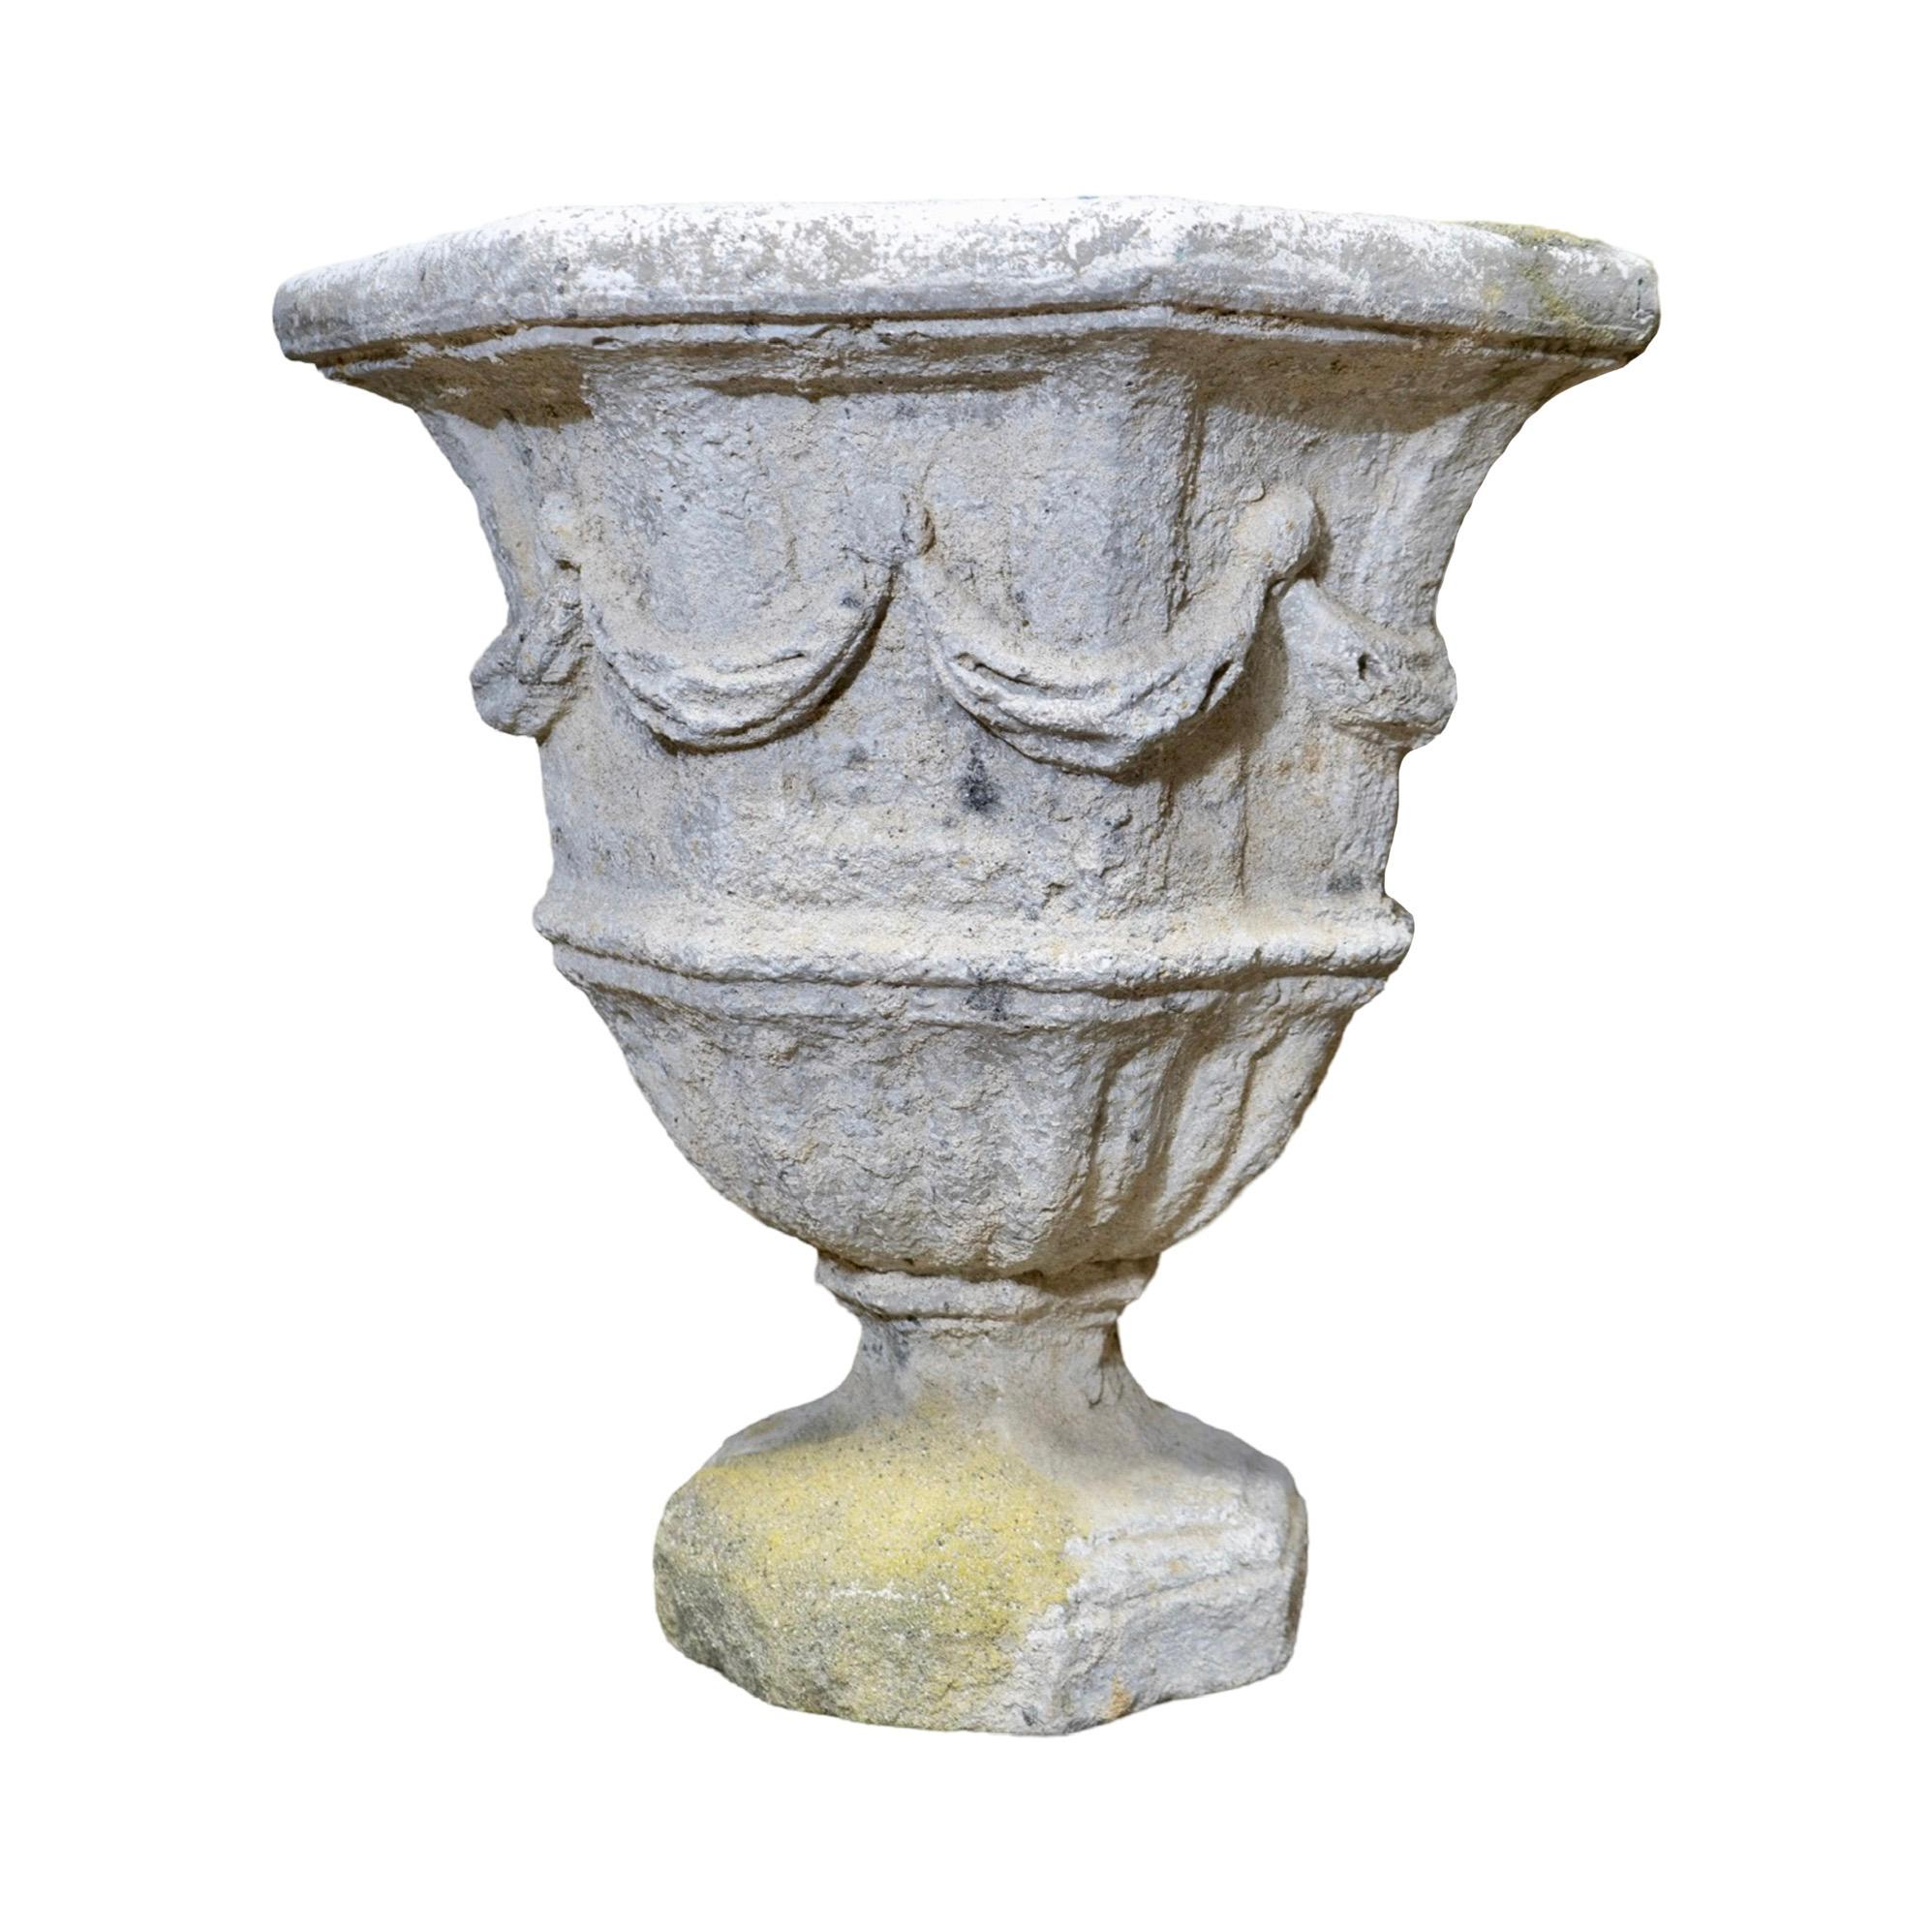 This French Limestone Planter is an antique and reclaimed piece from the contemporary period, imported from France. Made out of a durable granite composite, this octagonal-shaped planter with intricate carved swag detailing is frost-free and